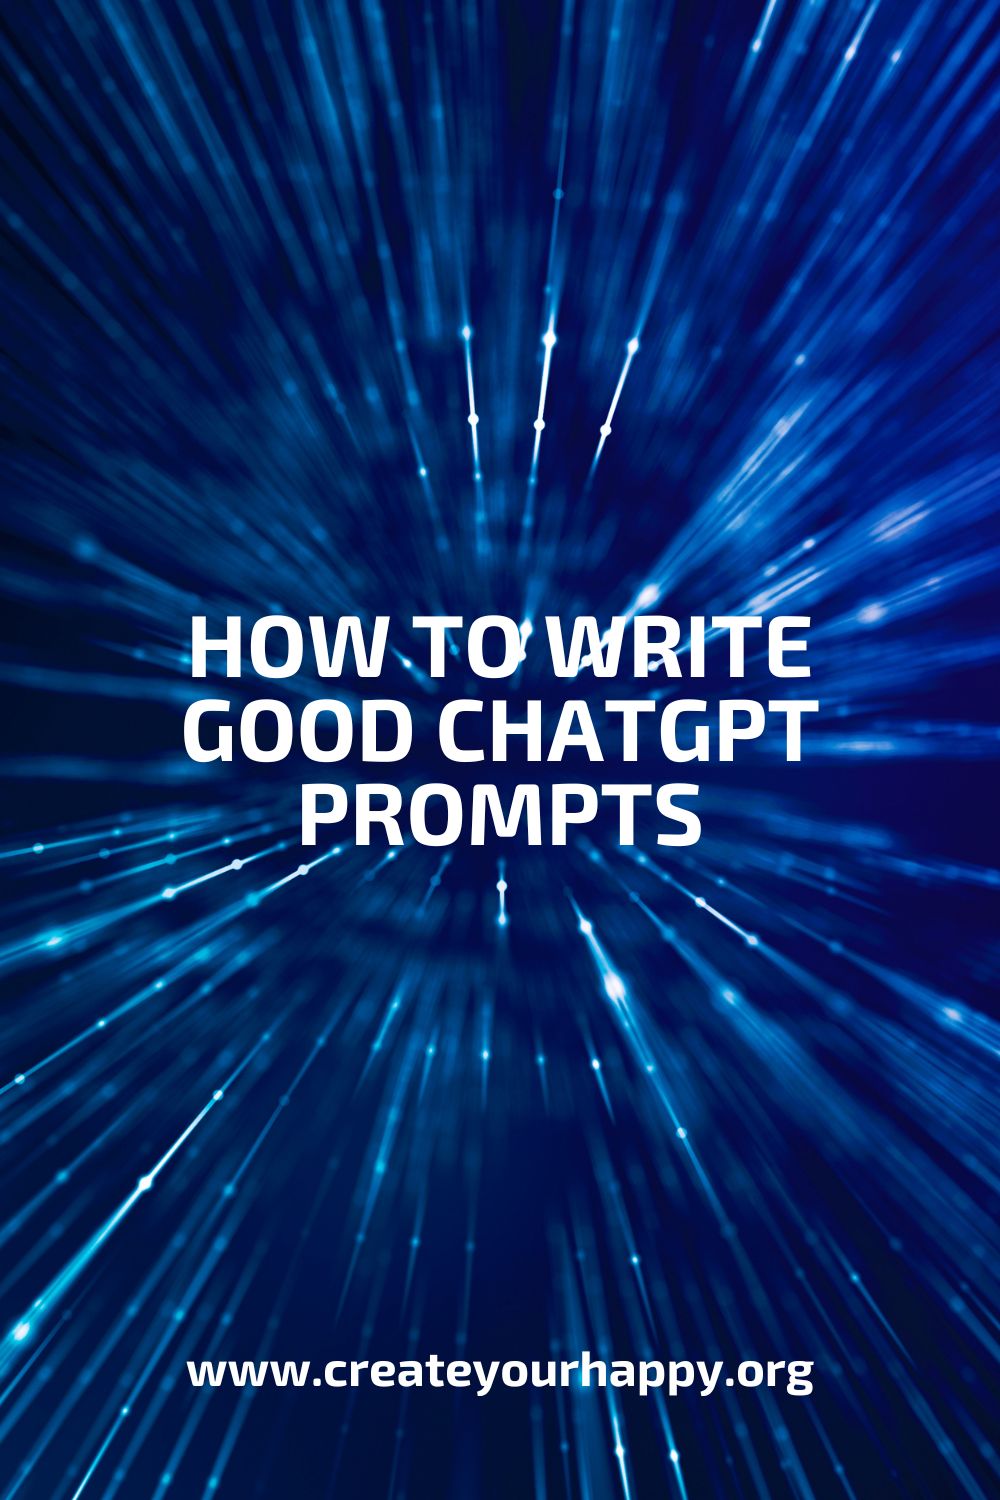 How to Write Good ChatGPT Prompts